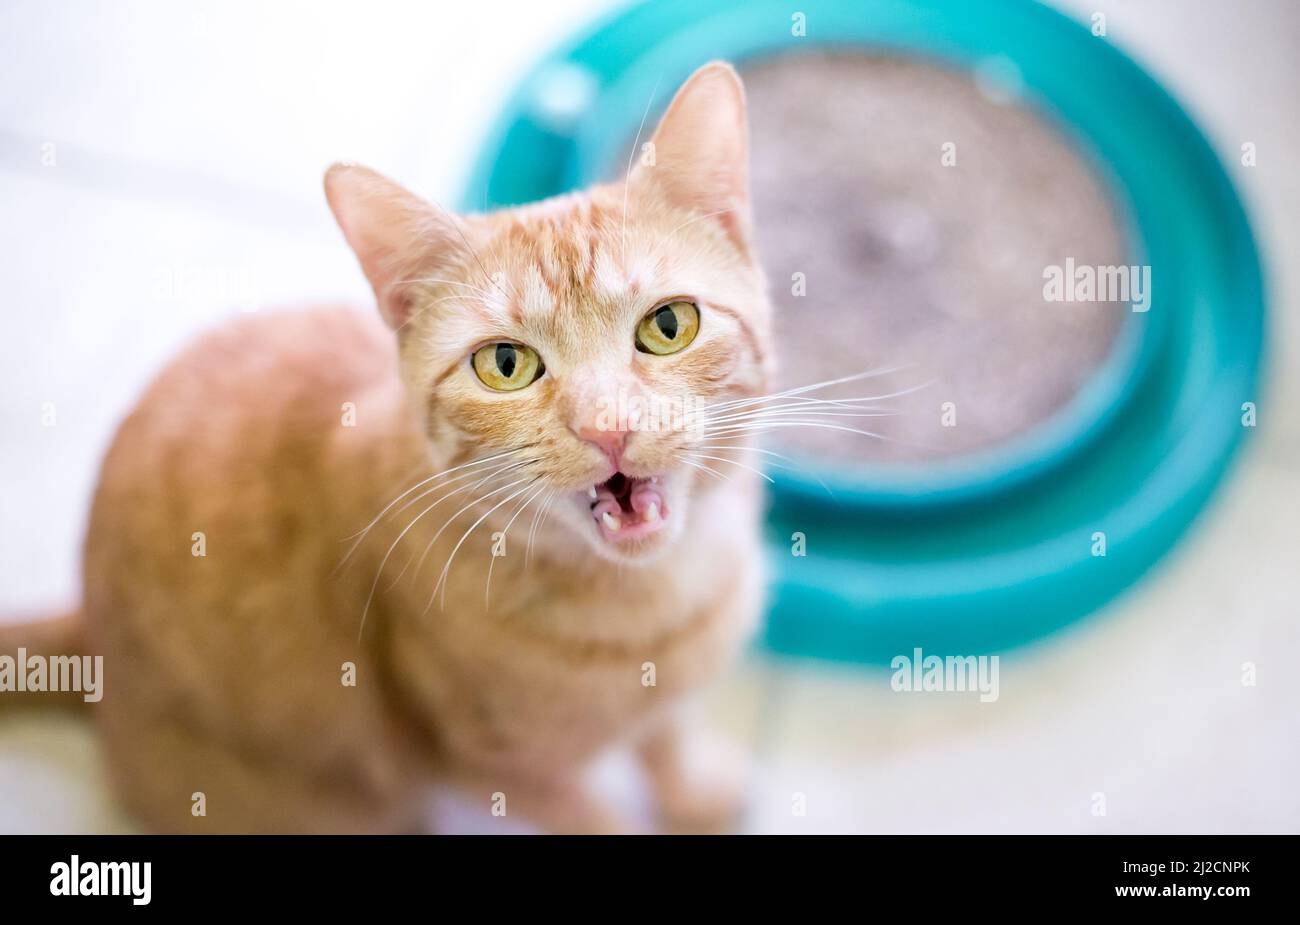 An orange tabby shorthair cat sitting next to an enrichment toy and meowing Stock Photo